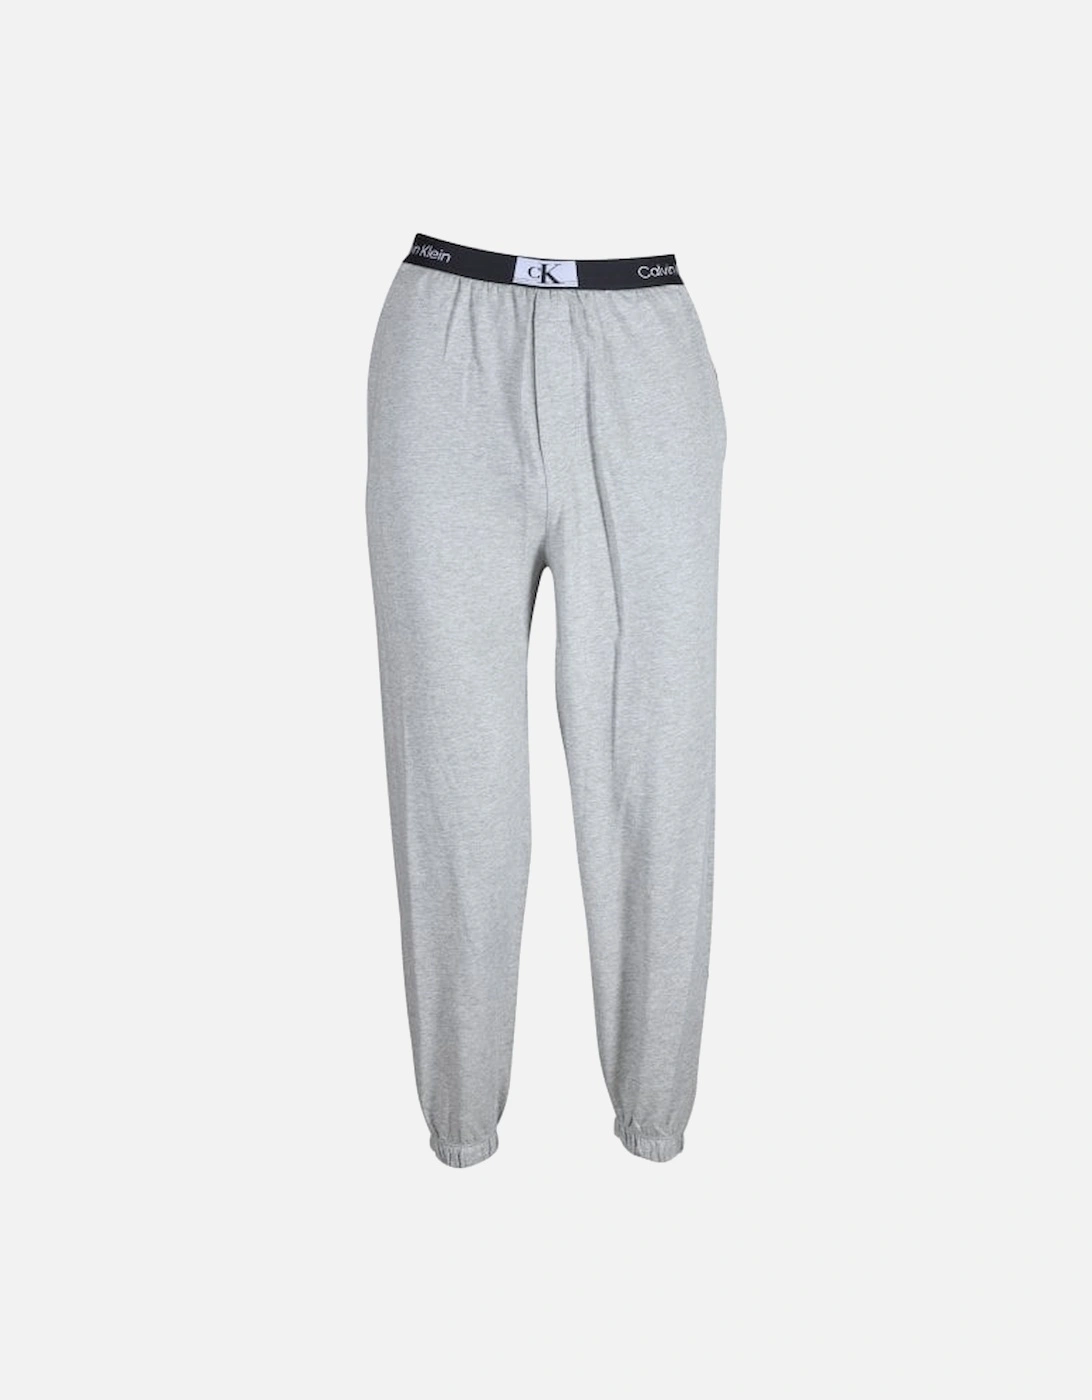 CK 96 French Terry Jogging Bottoms, Grey Heather, 4 of 3